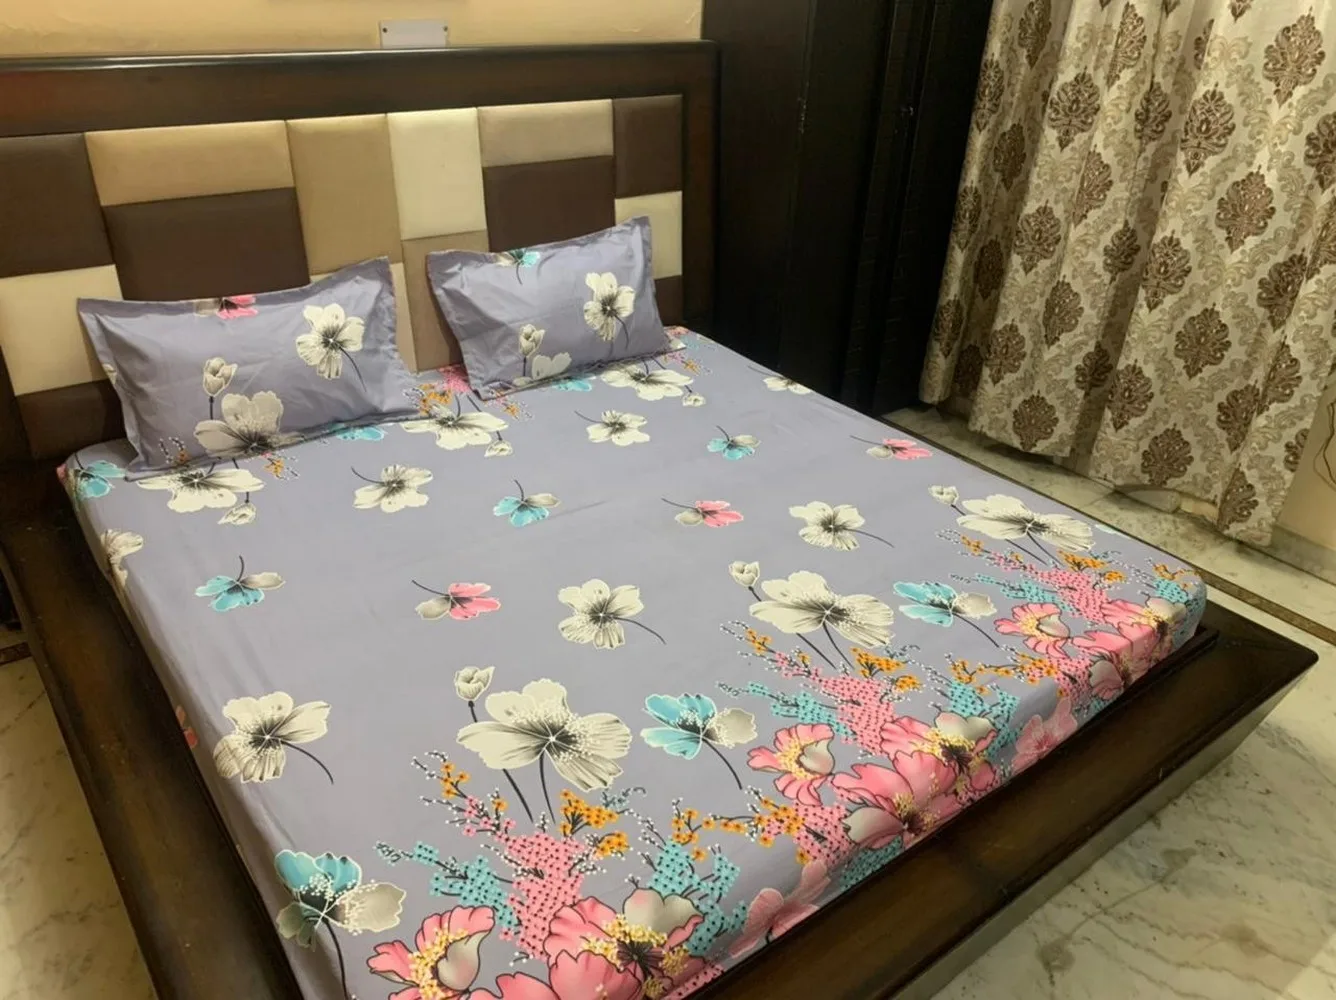 Bedsheet printed, Fitted, Elastic Corner, 90x100, Glace Cotton, 2 Pillow Covers, flowers design